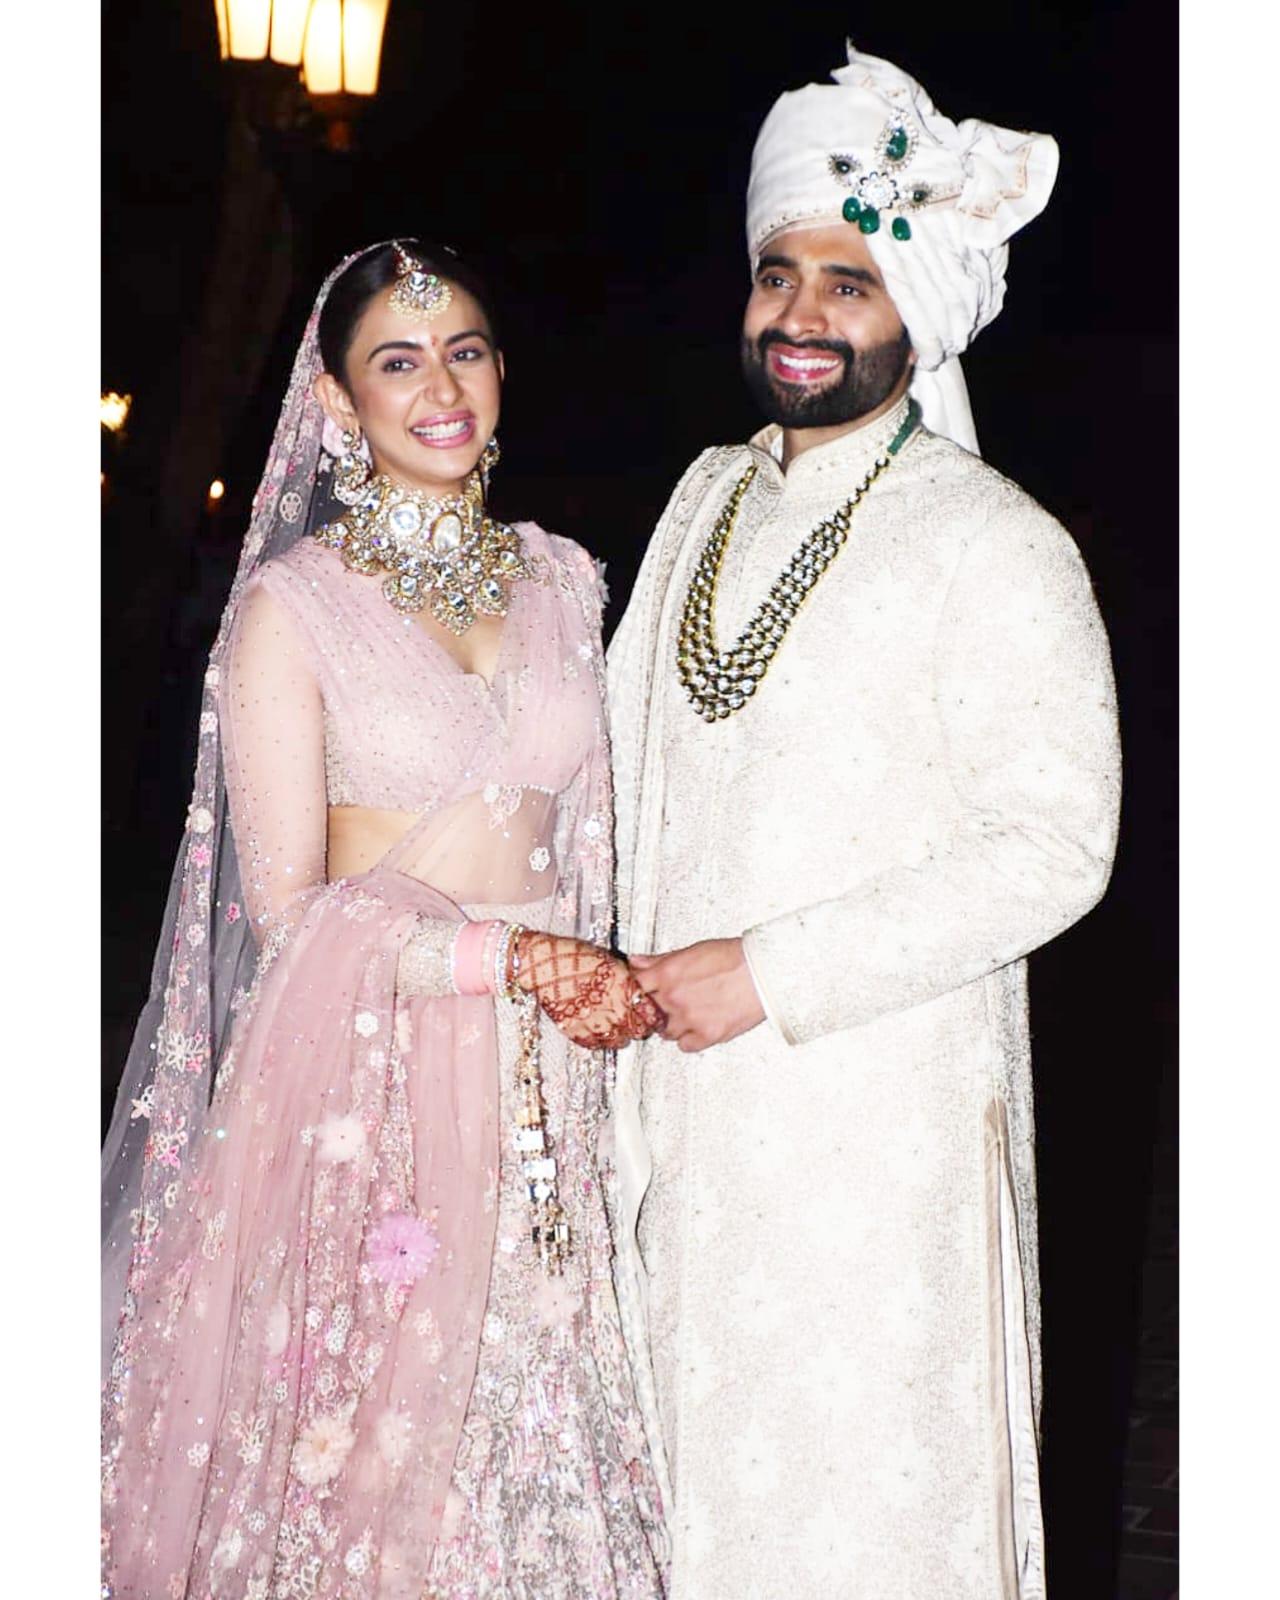 For her wedding, Rakul chose heavy jewellery and subtle makeup, achieving a perfect balance